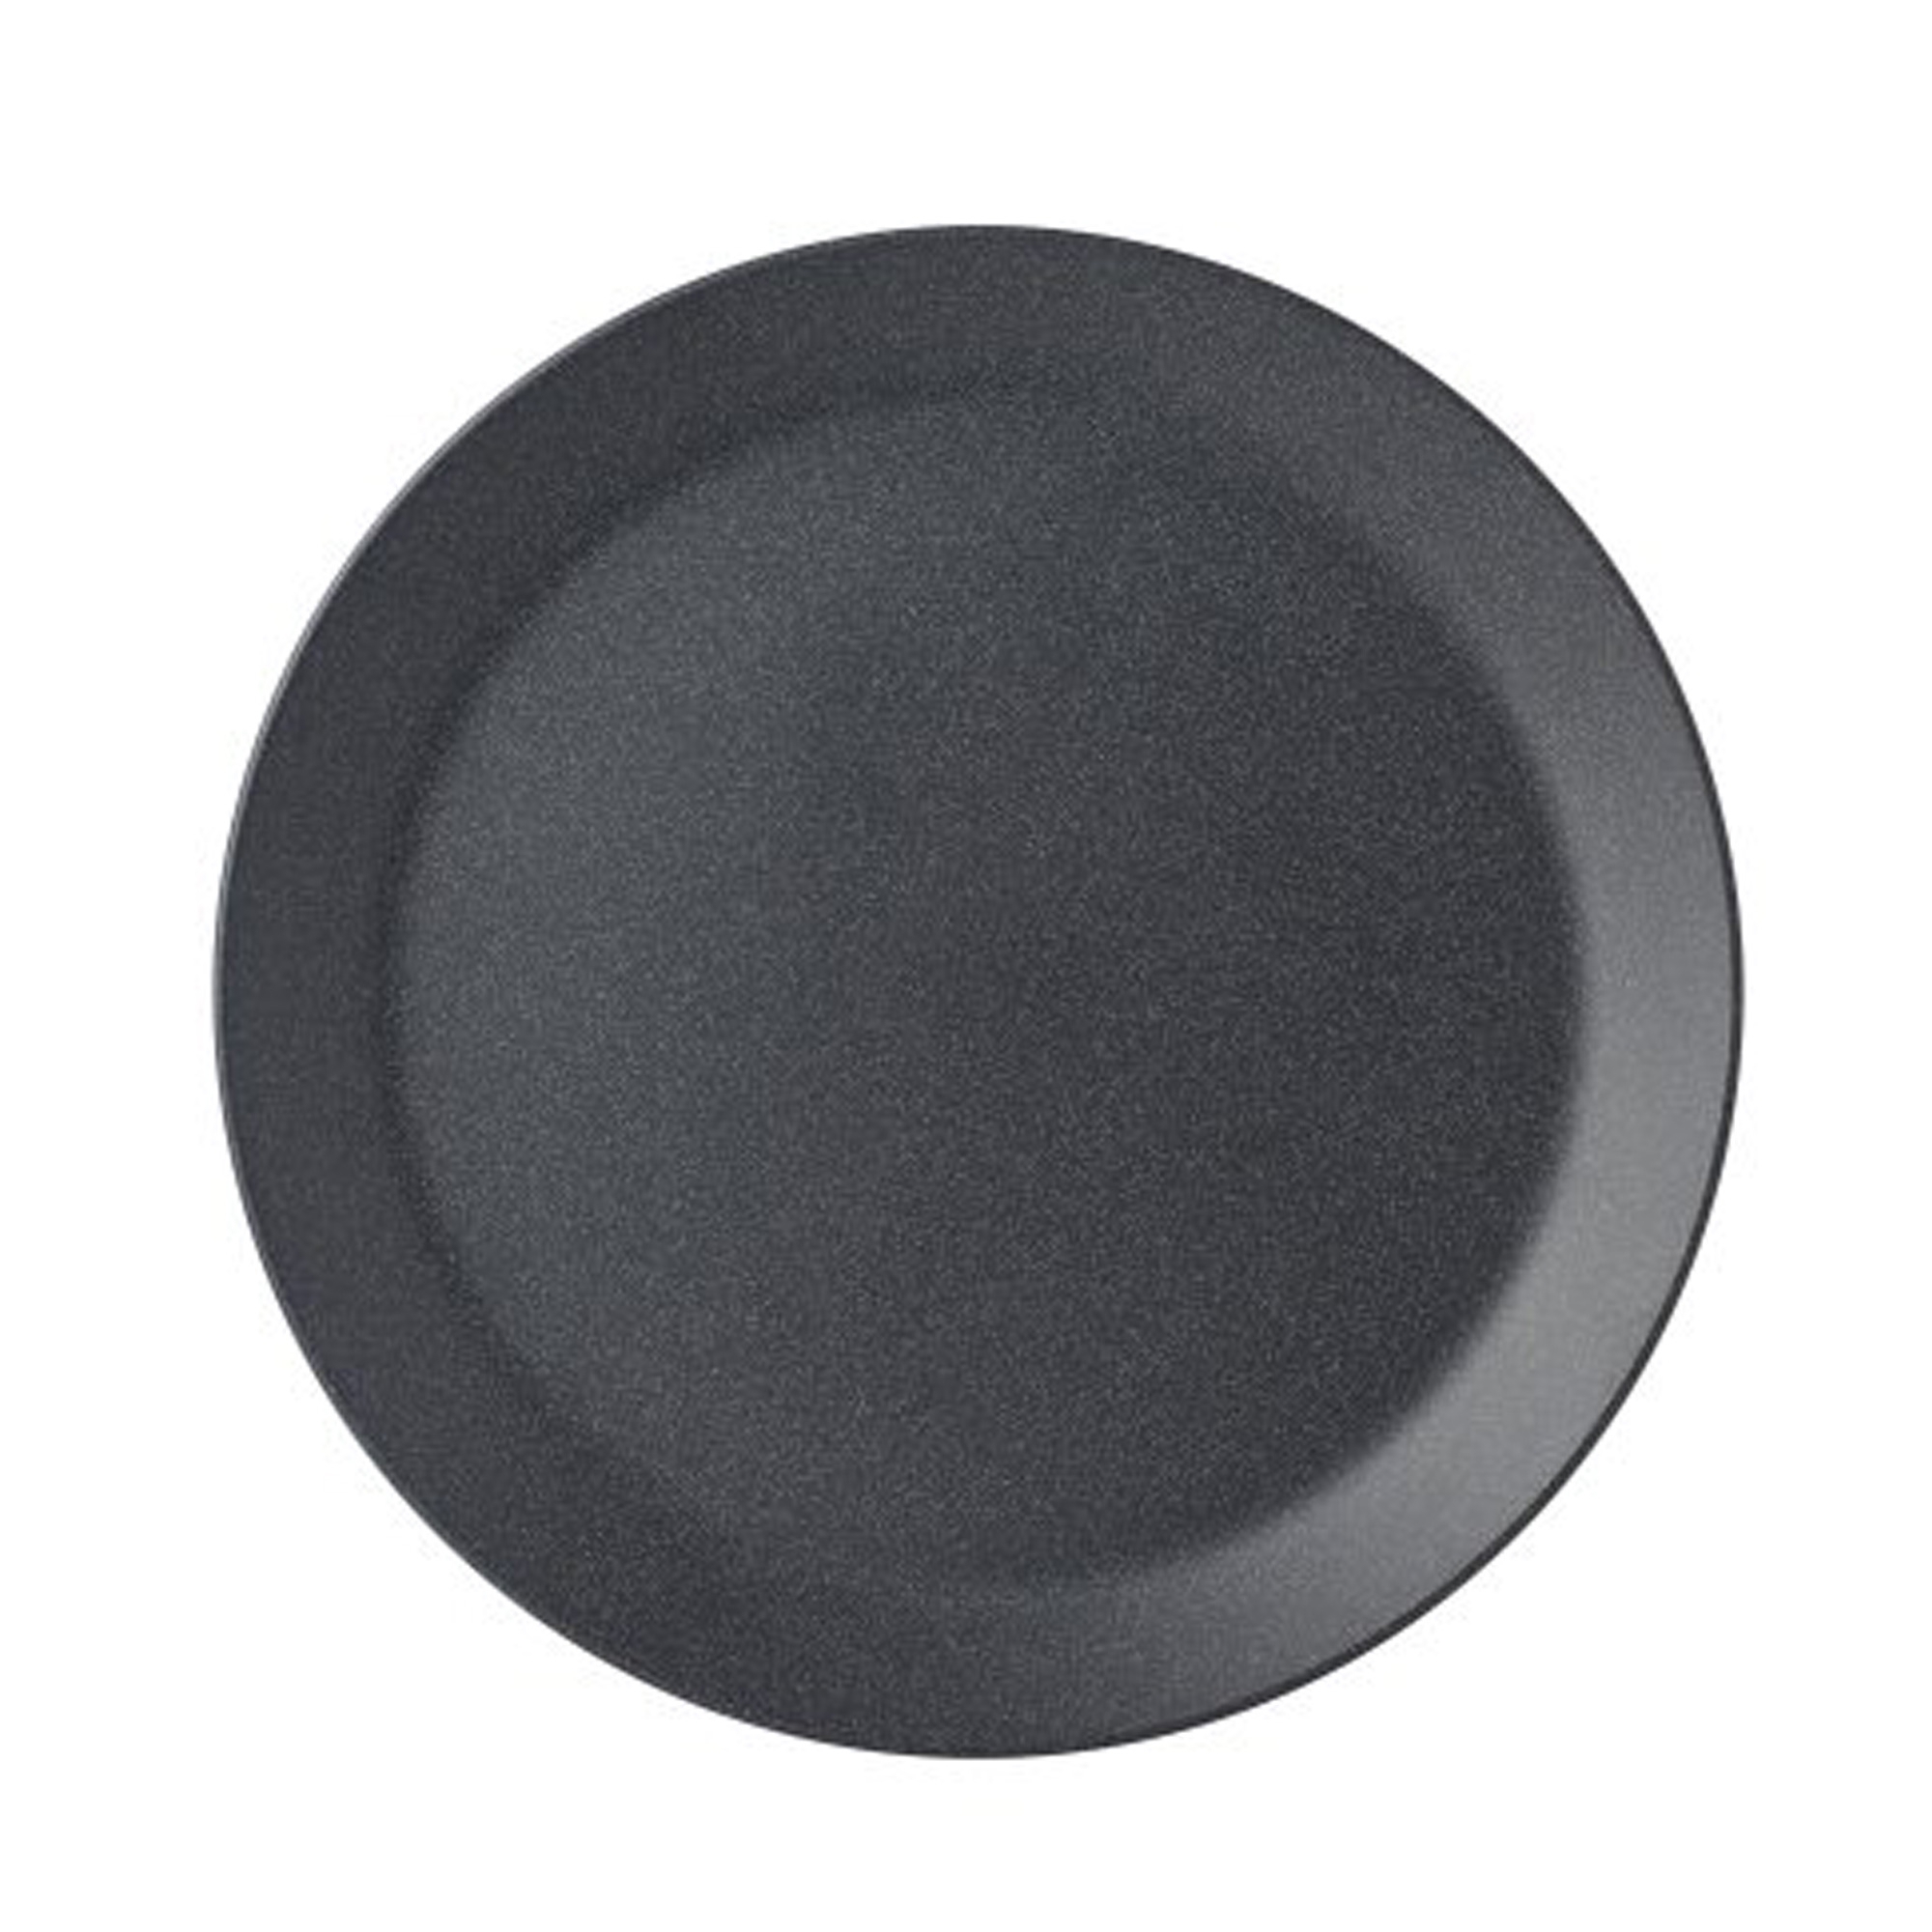 Mepal - Bloom Breakfast Plate - different colors